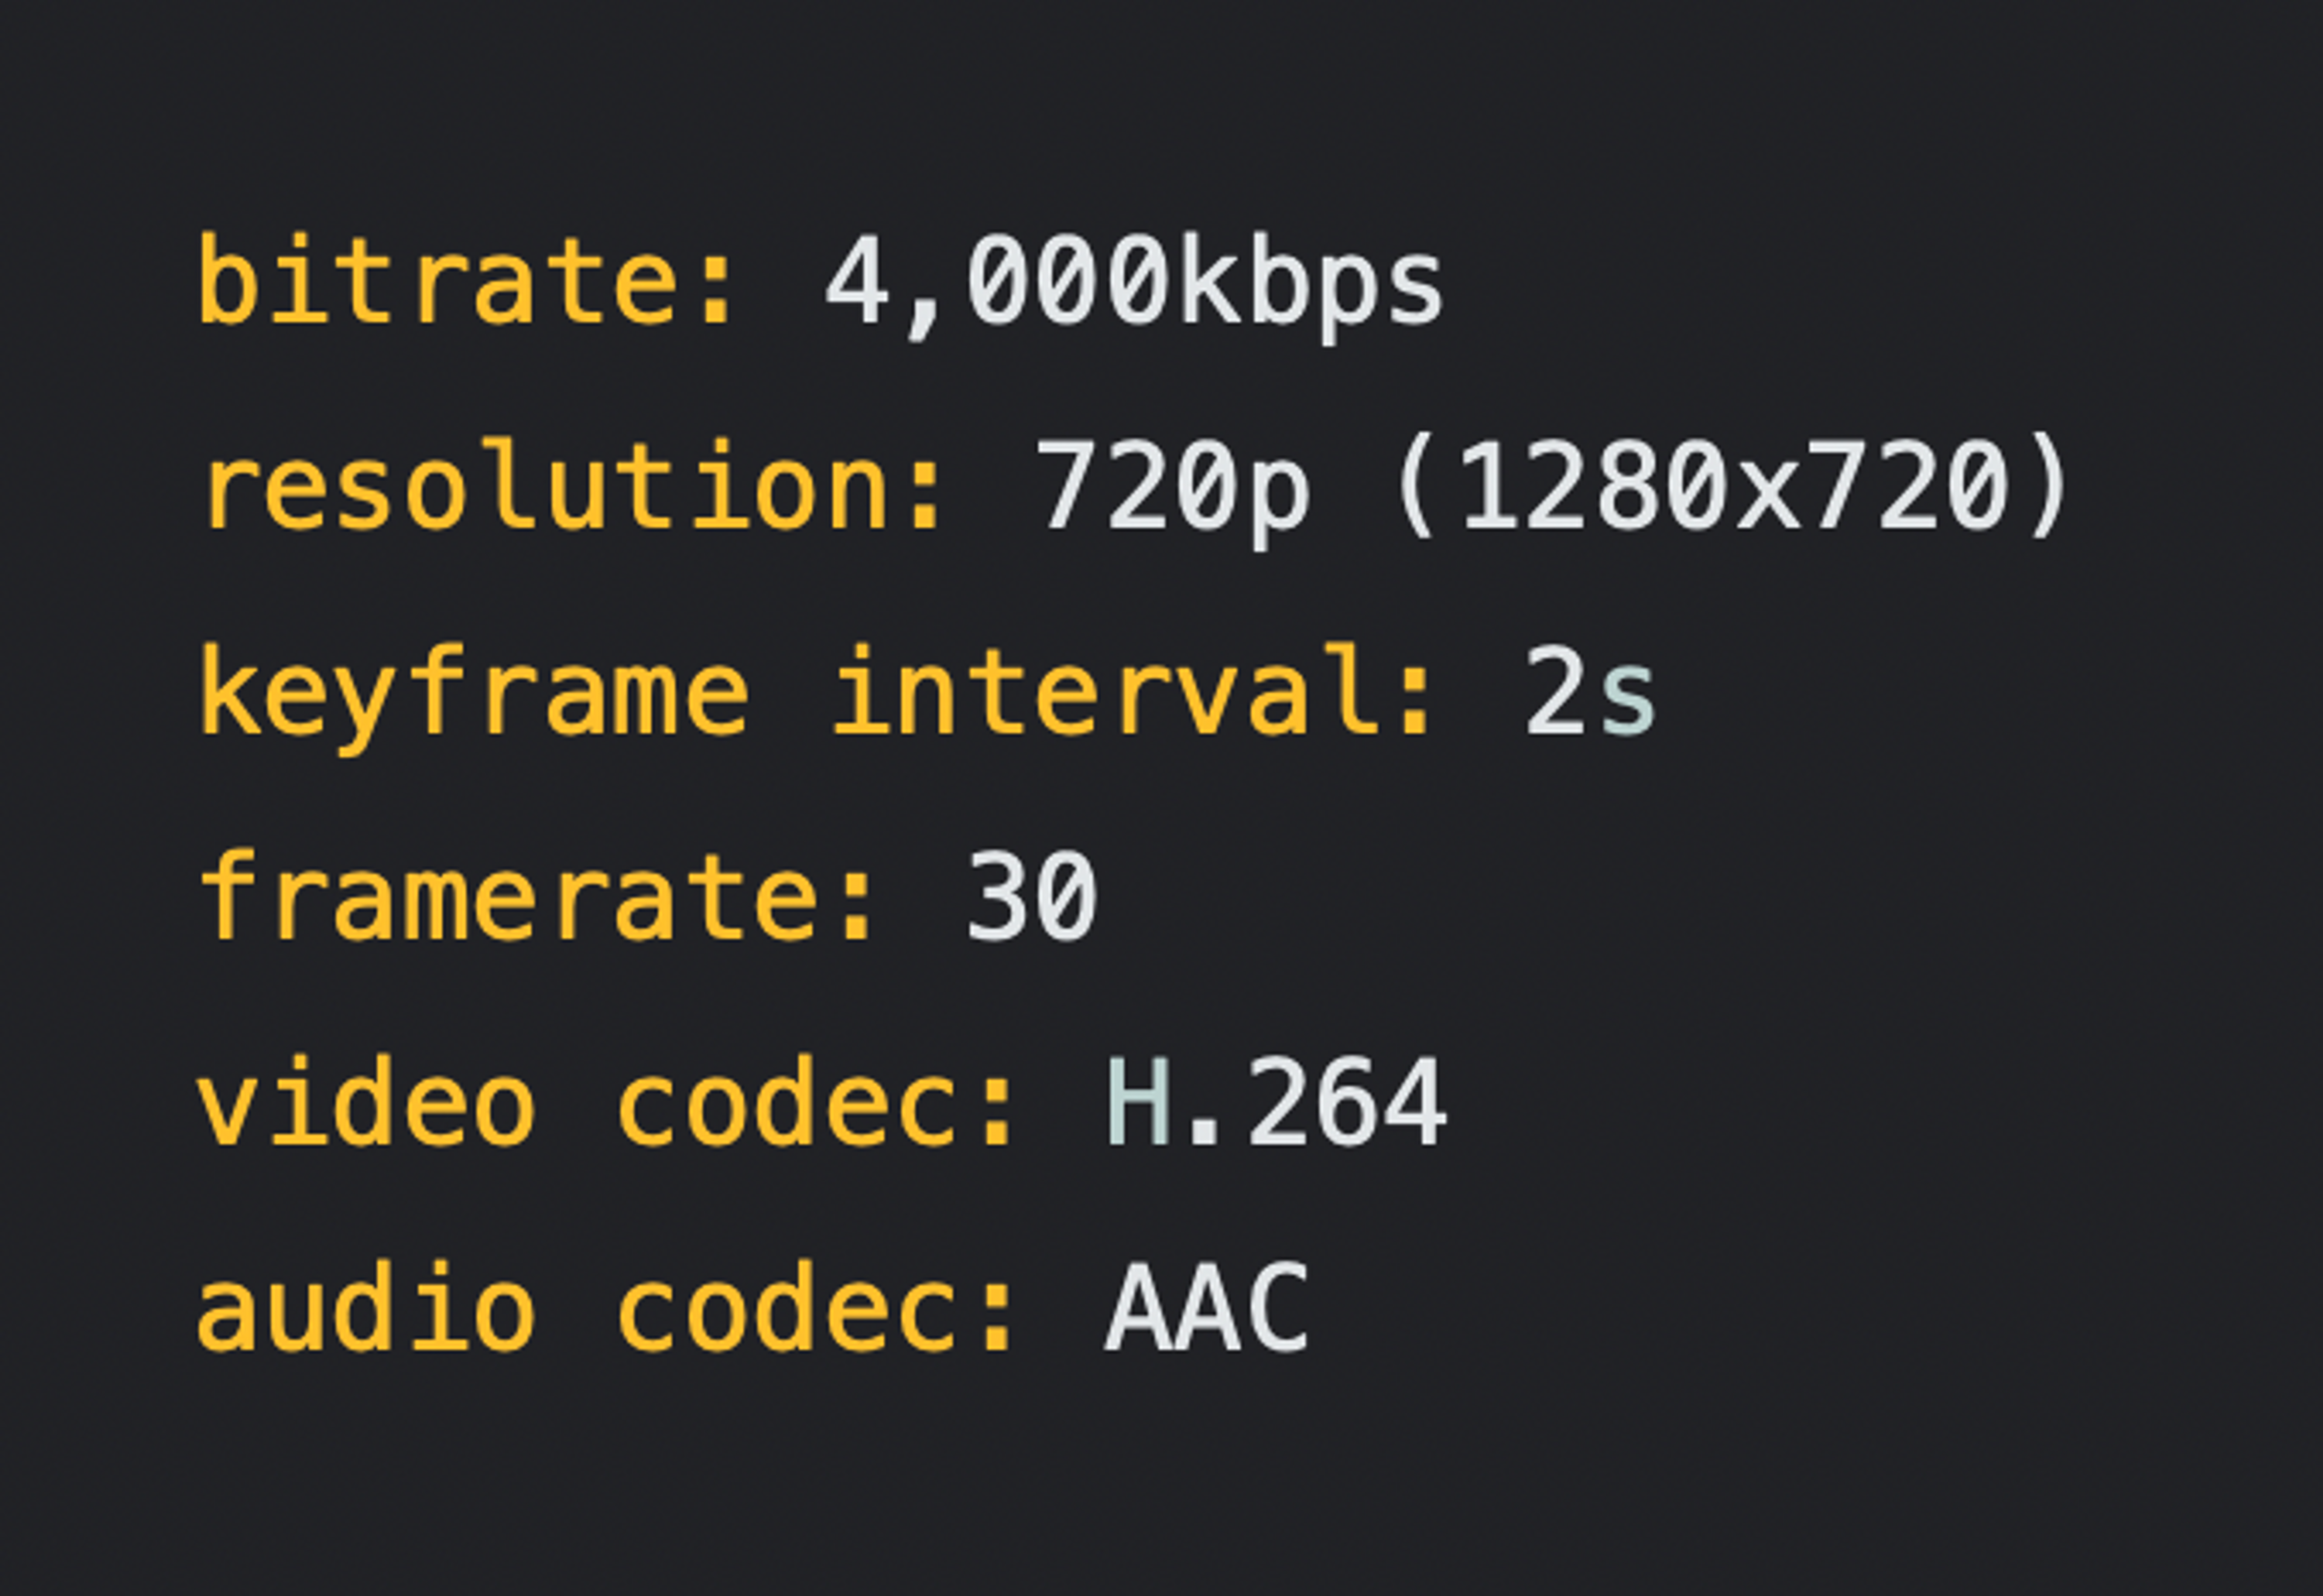 An image that shows bitrate, resolution, keyframe interval, framerate, video codec and audio codec